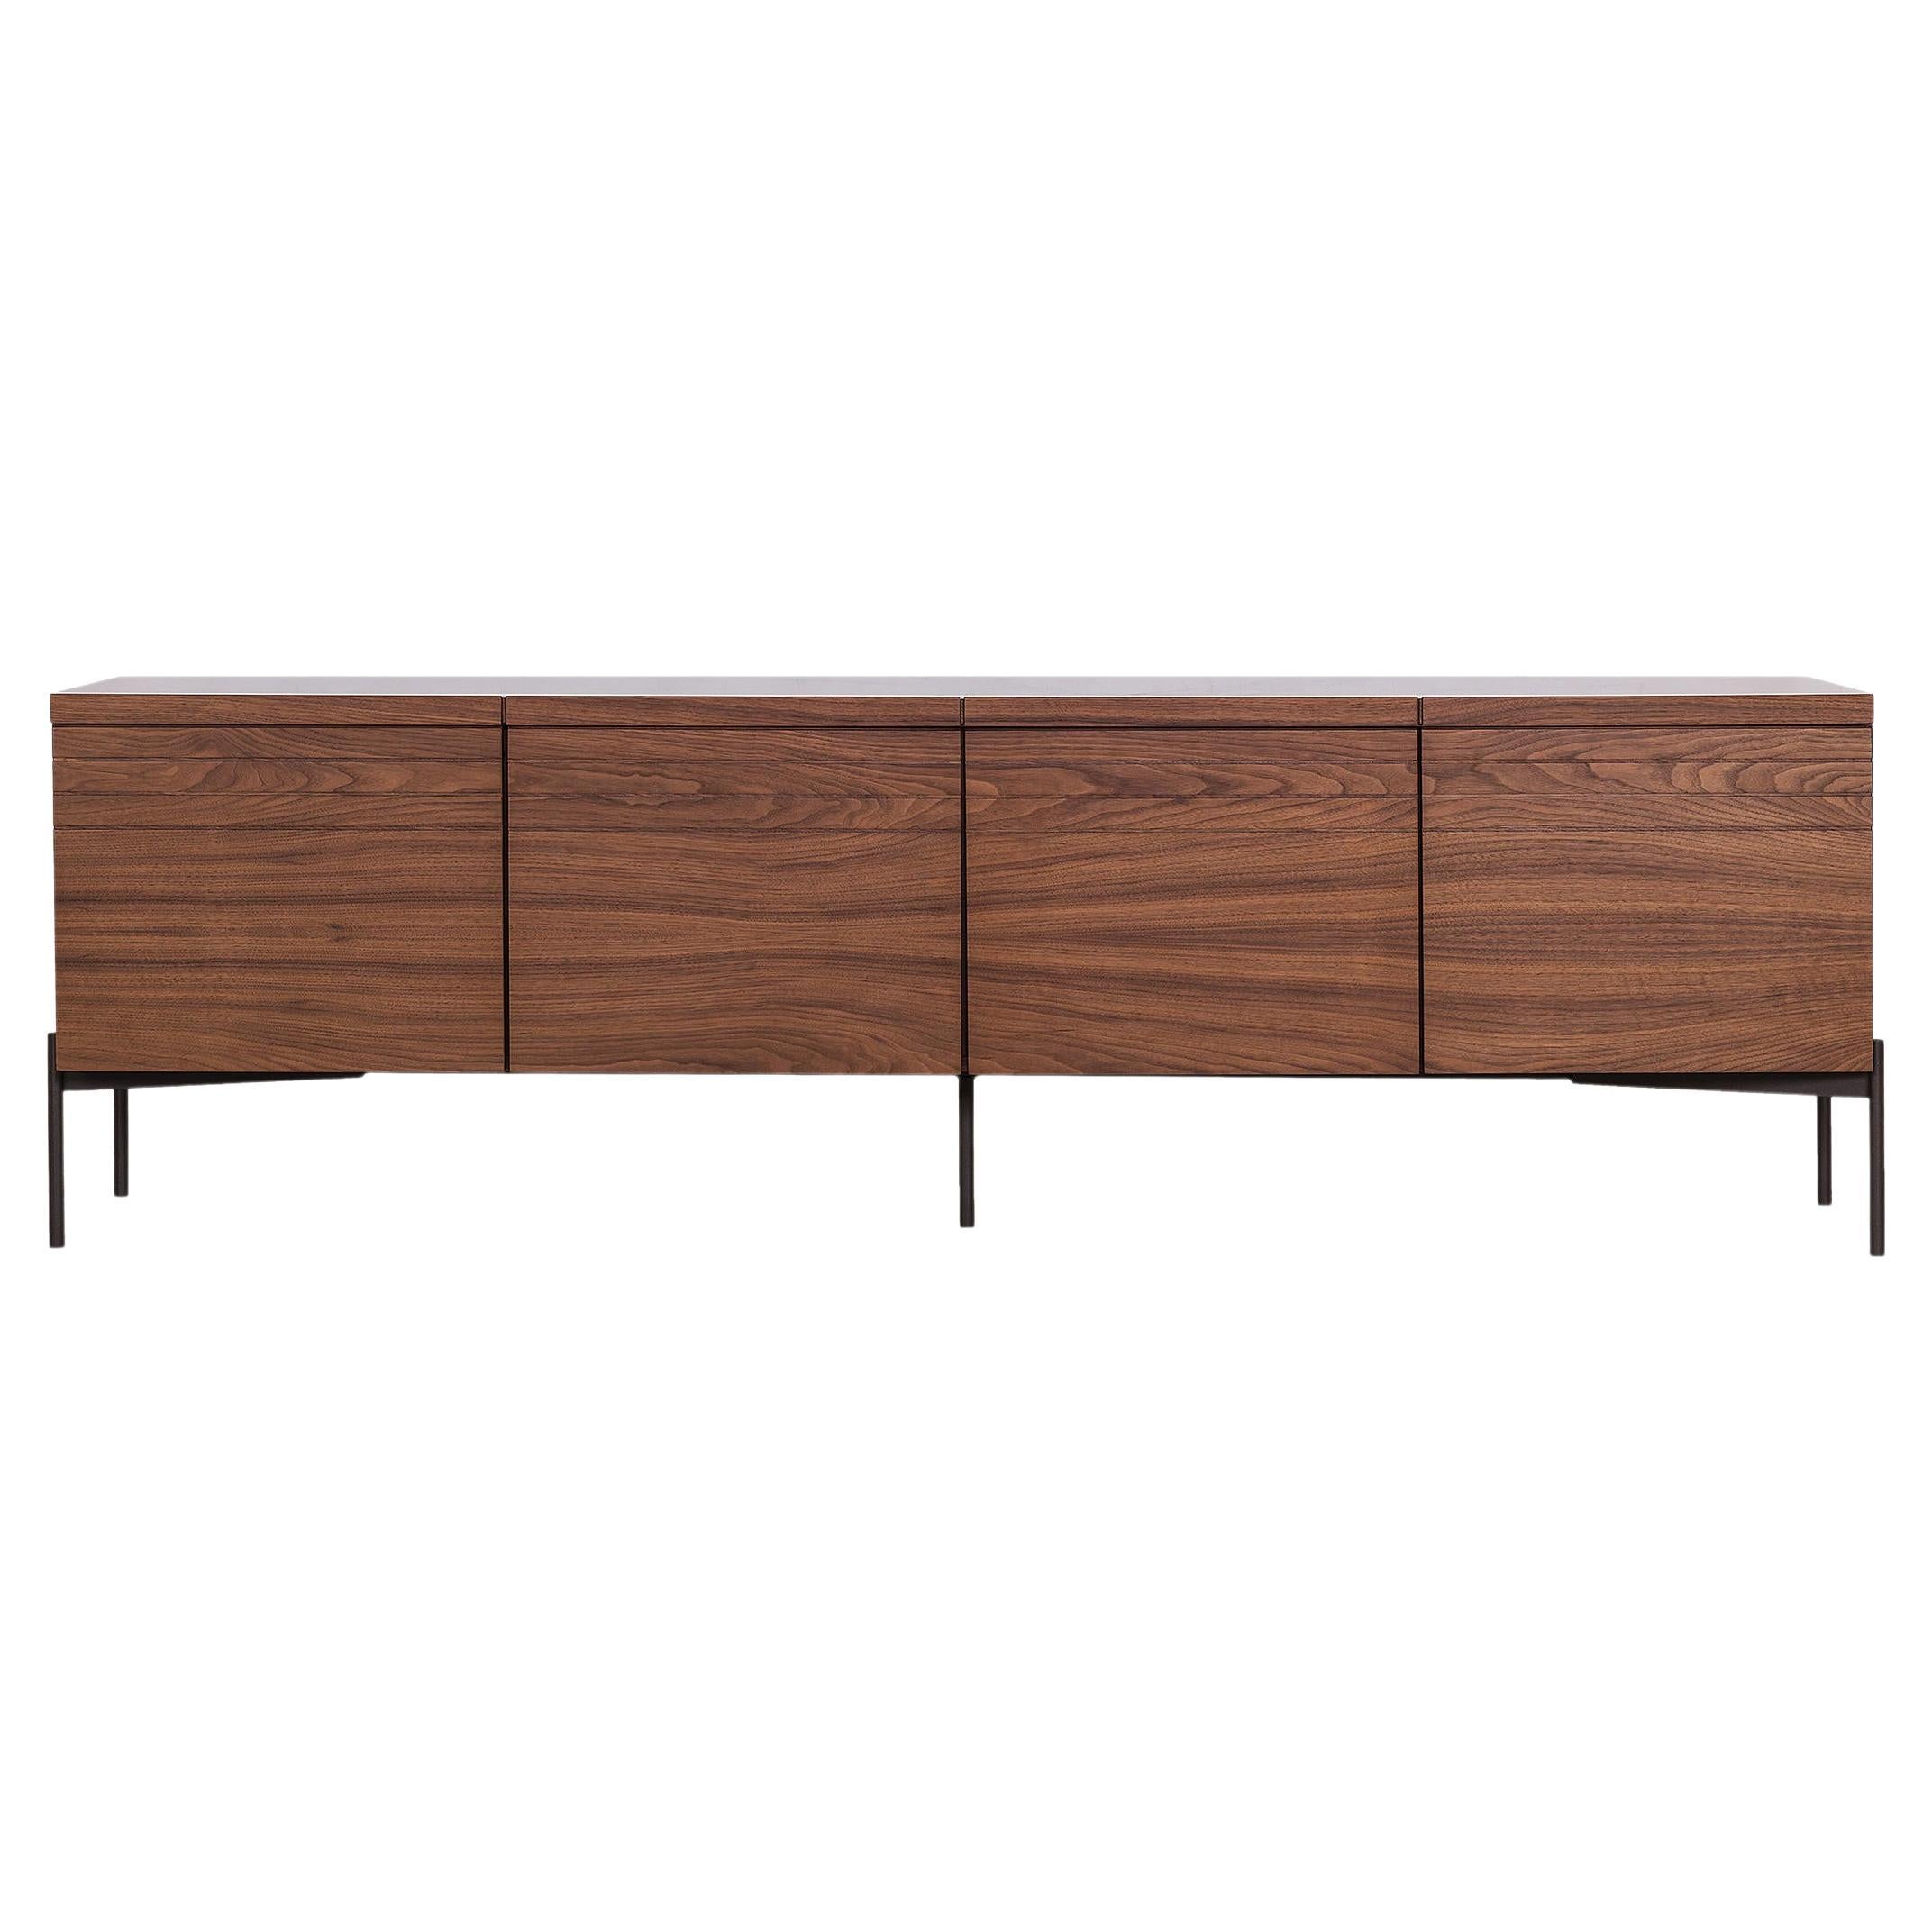 Dining room sideboard characterized by simplicity with attention to detail. The horizontal lines carved around the cabinet along with the simple metal base, give the sideboard a more elegant dimension. The sideboard has four push-pull doors and an